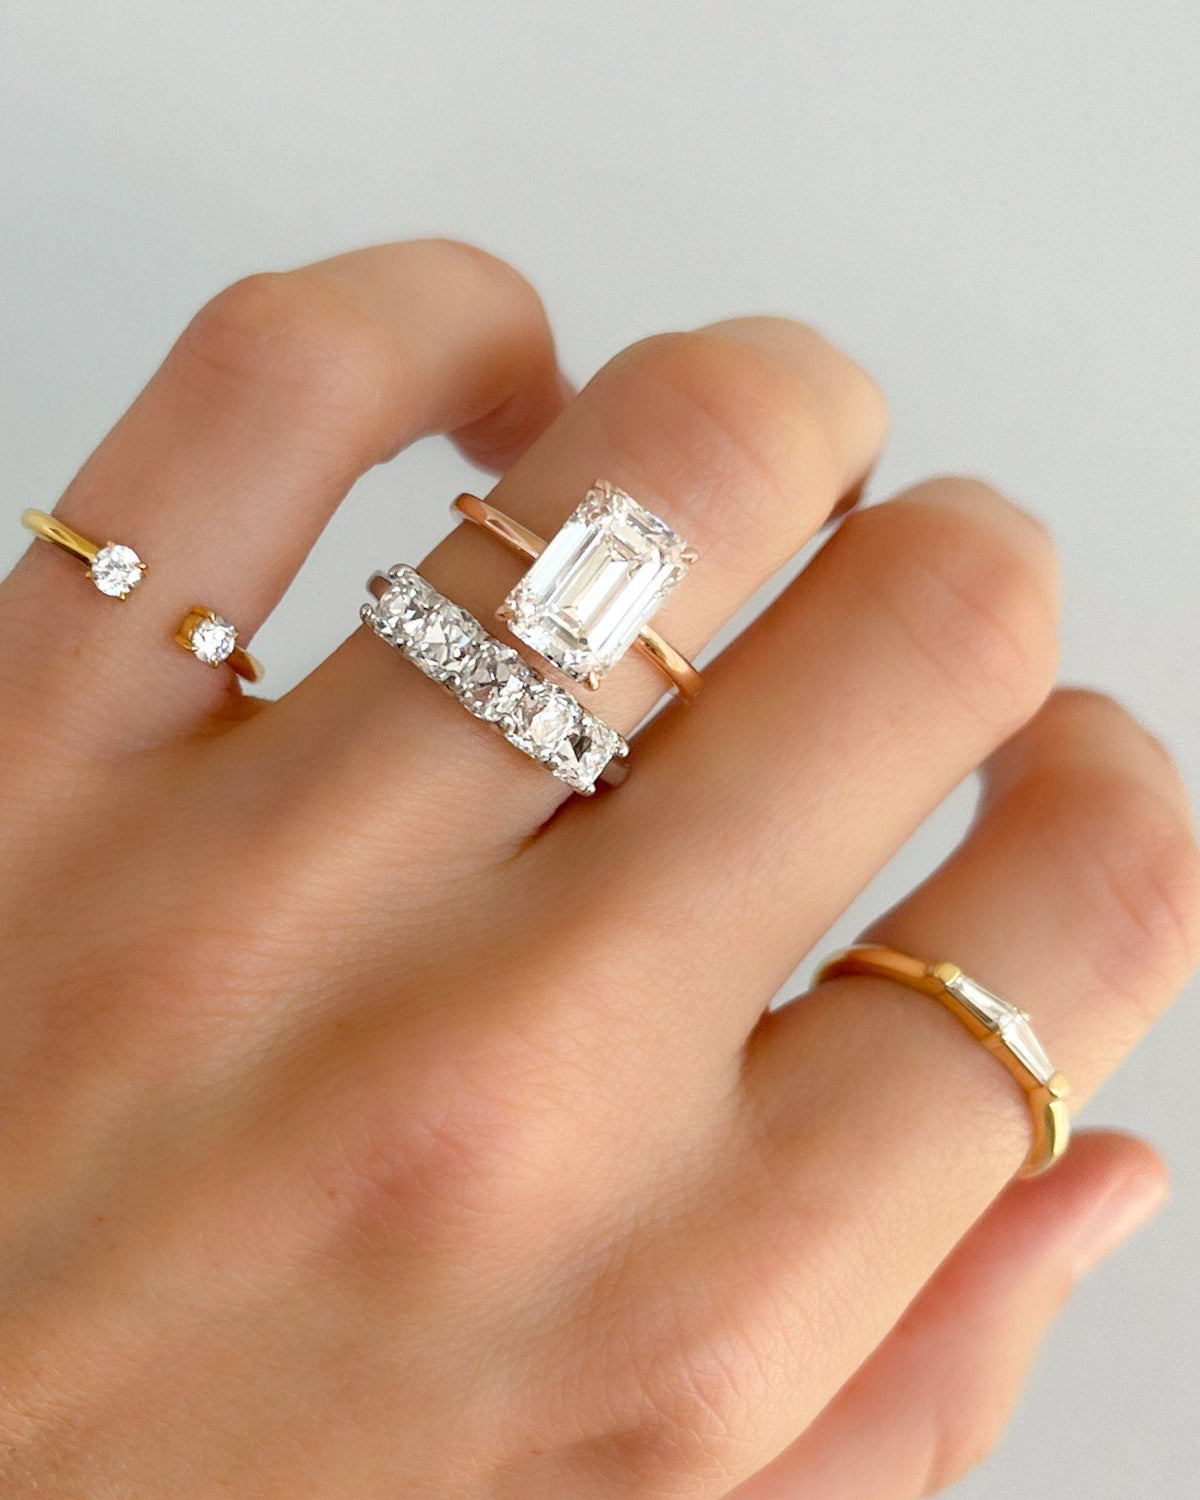 Highlight Crescent Solitaire With Emerald Cut by Good Stone available in Gold and Platinum